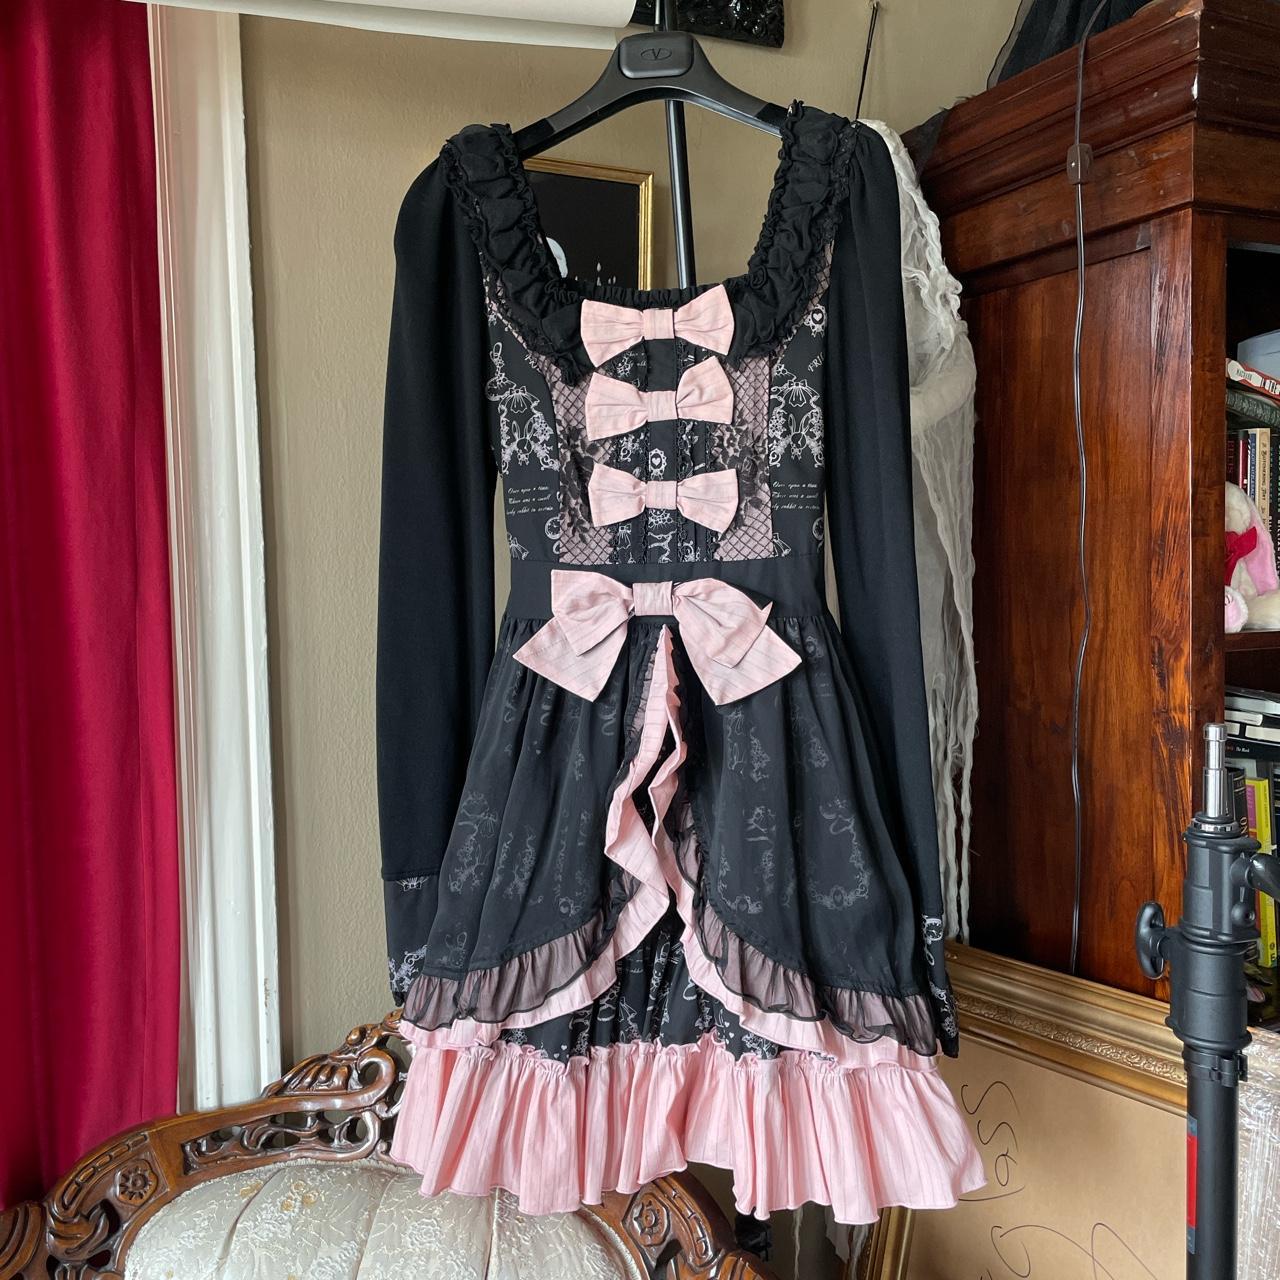 H.naoto frill gothic punk lolita dress bought in SF...